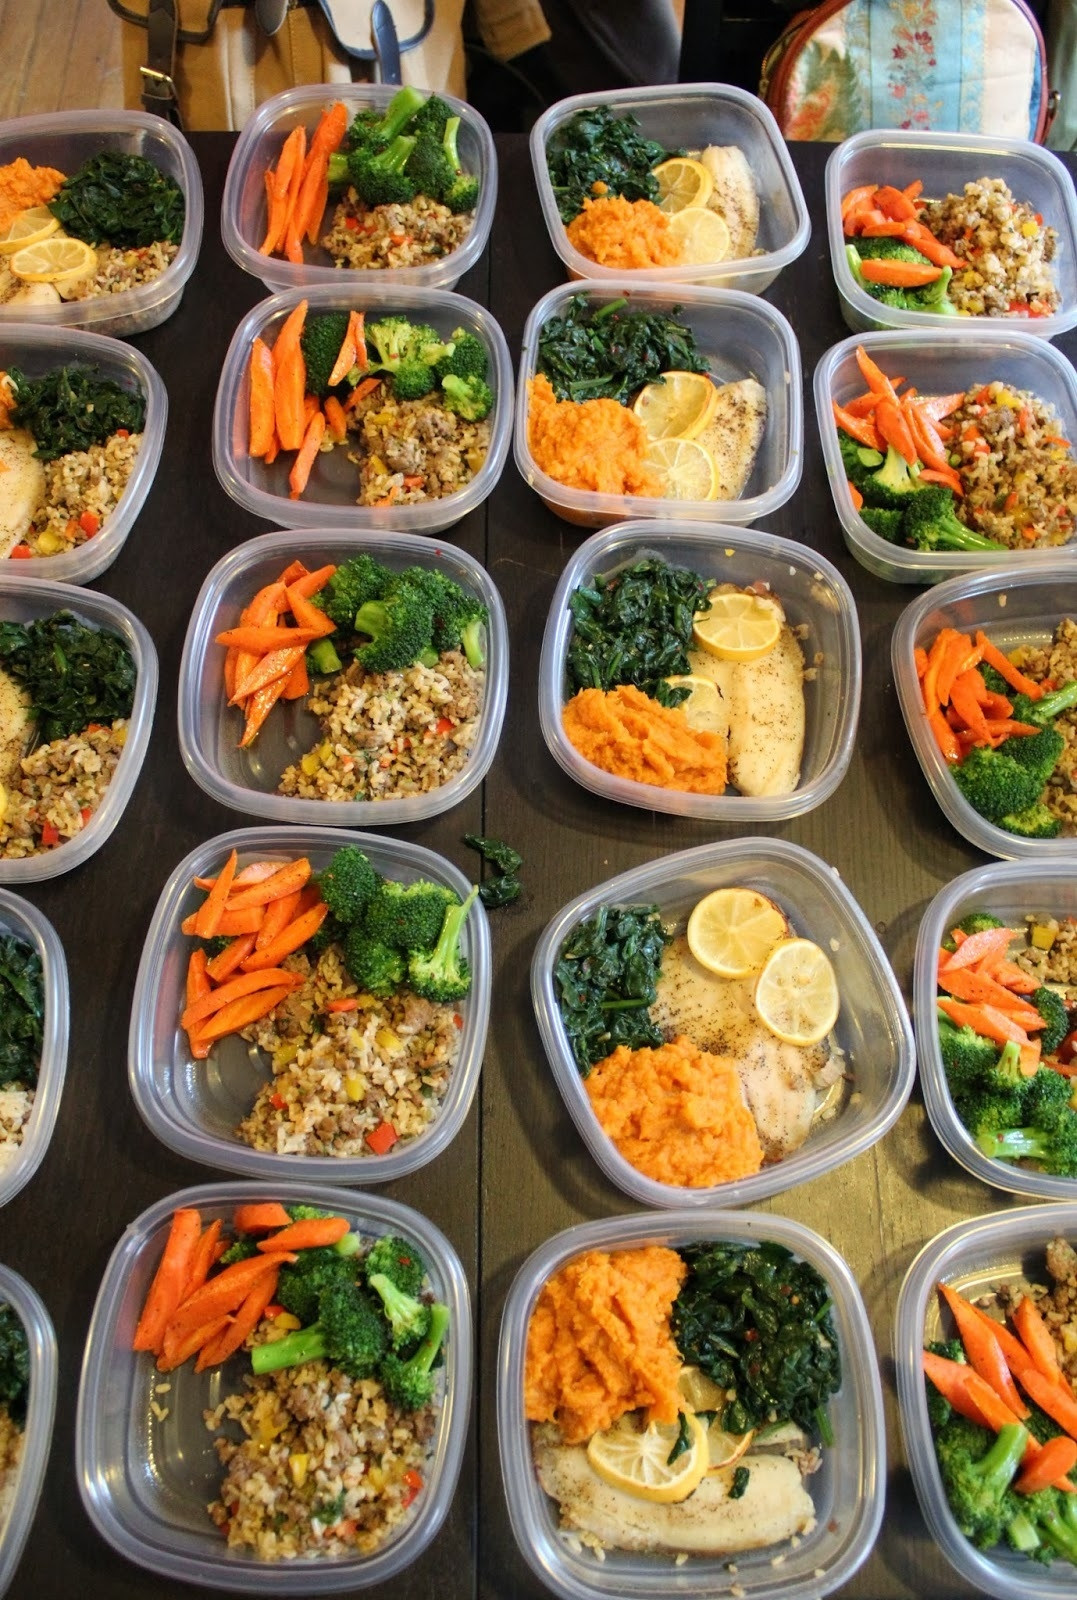 Dinner Ideas Healthy
 Healthy Meal Prep Ideas For The WeekWritings and Papers